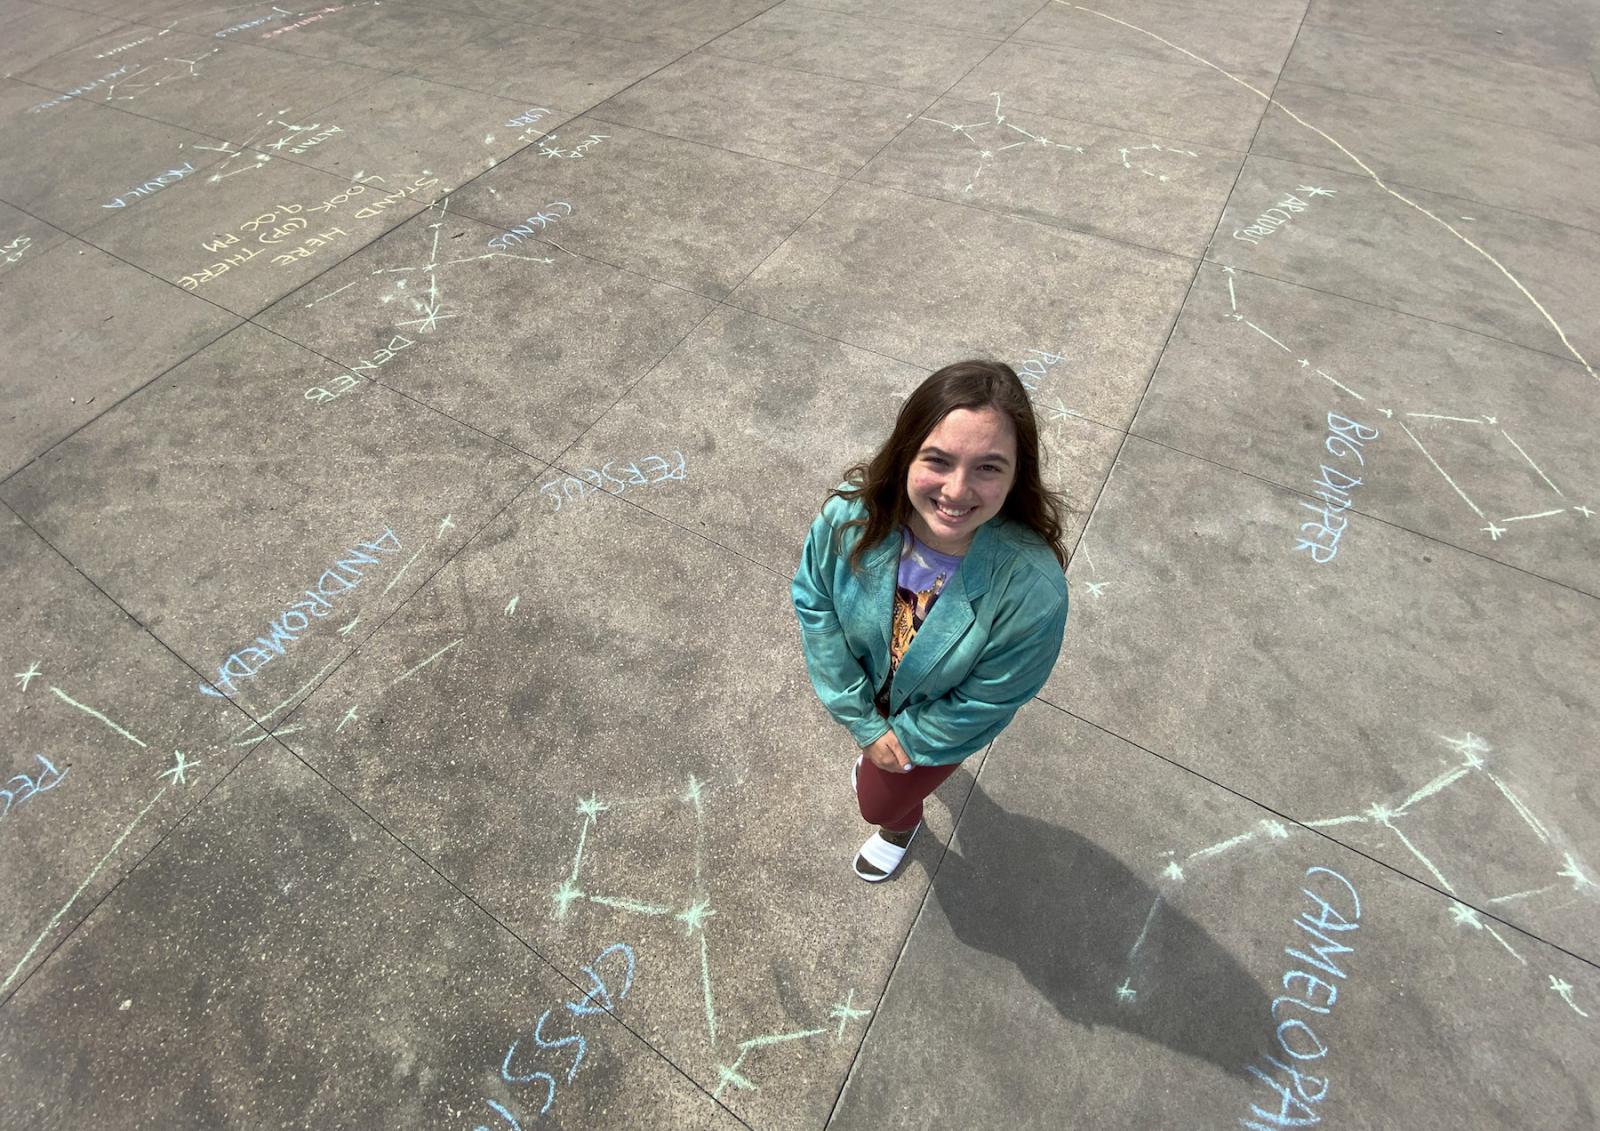 Avery Greene stands on a sidewalk decorated with chalk drawings of constellations.